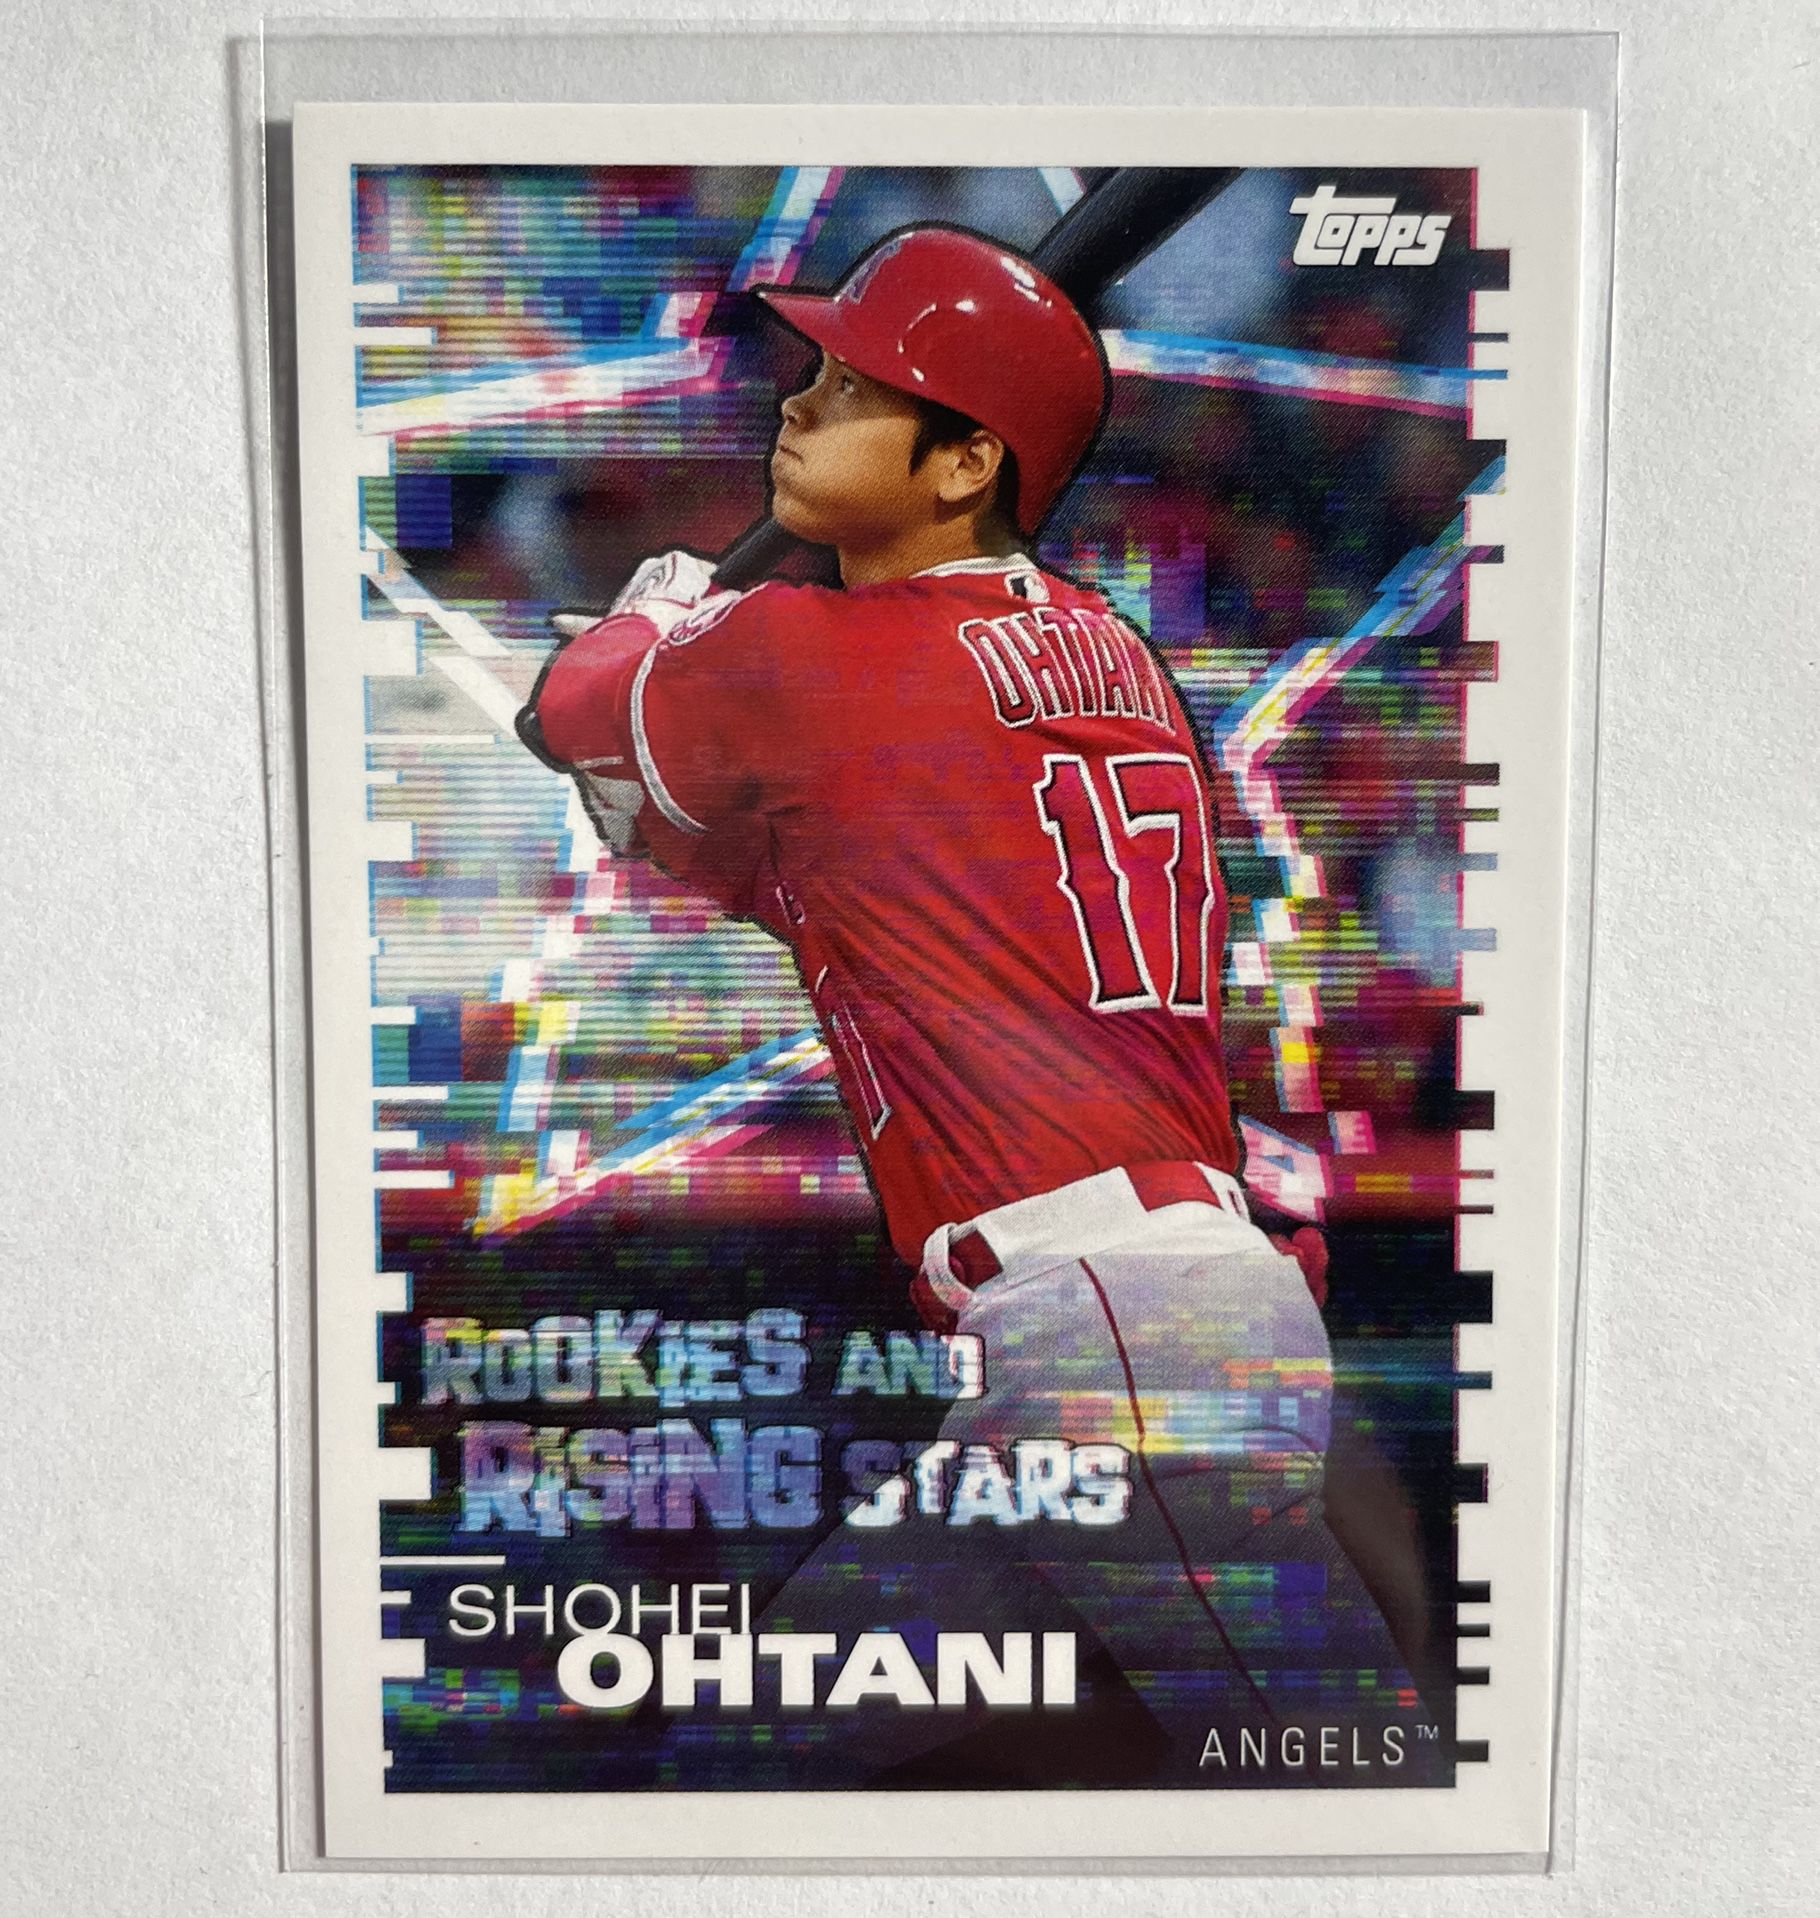 Rare Mint 2019 Topps MLB Baseball Sticker Card Collection Shohei Ohtani Rookies and Rising Stars Los Angeles Angels and Ian Kinsler #104 PSA10 pop 0